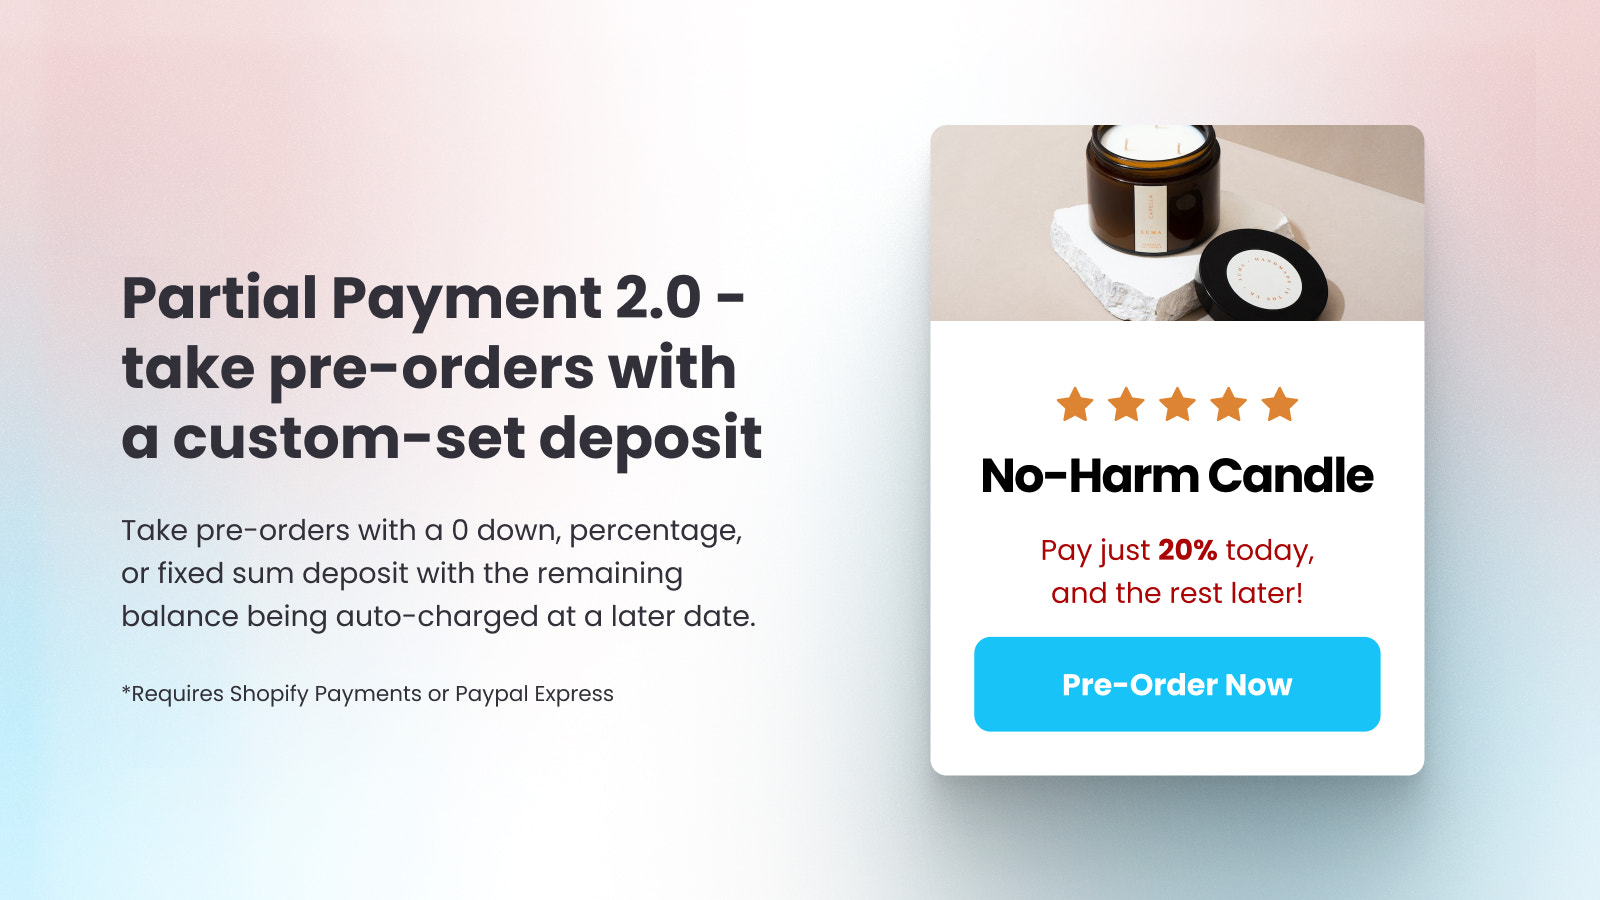 Partial Payment, 0 down deposits, Charge balance automatically